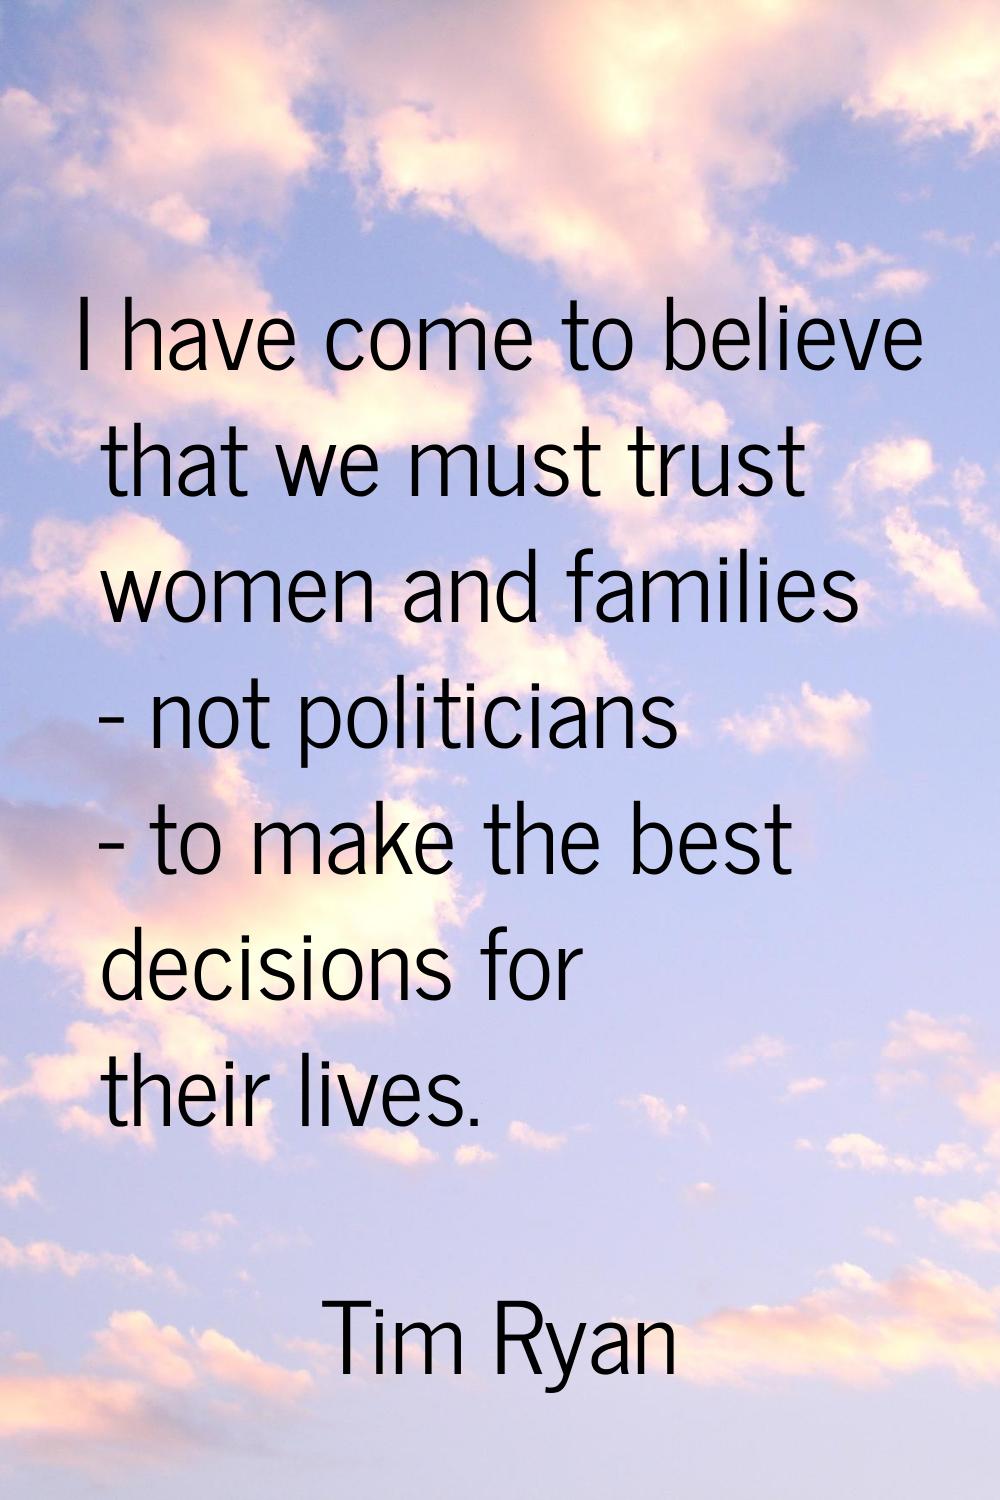 I have come to believe that we must trust women and families - not politicians - to make the best d